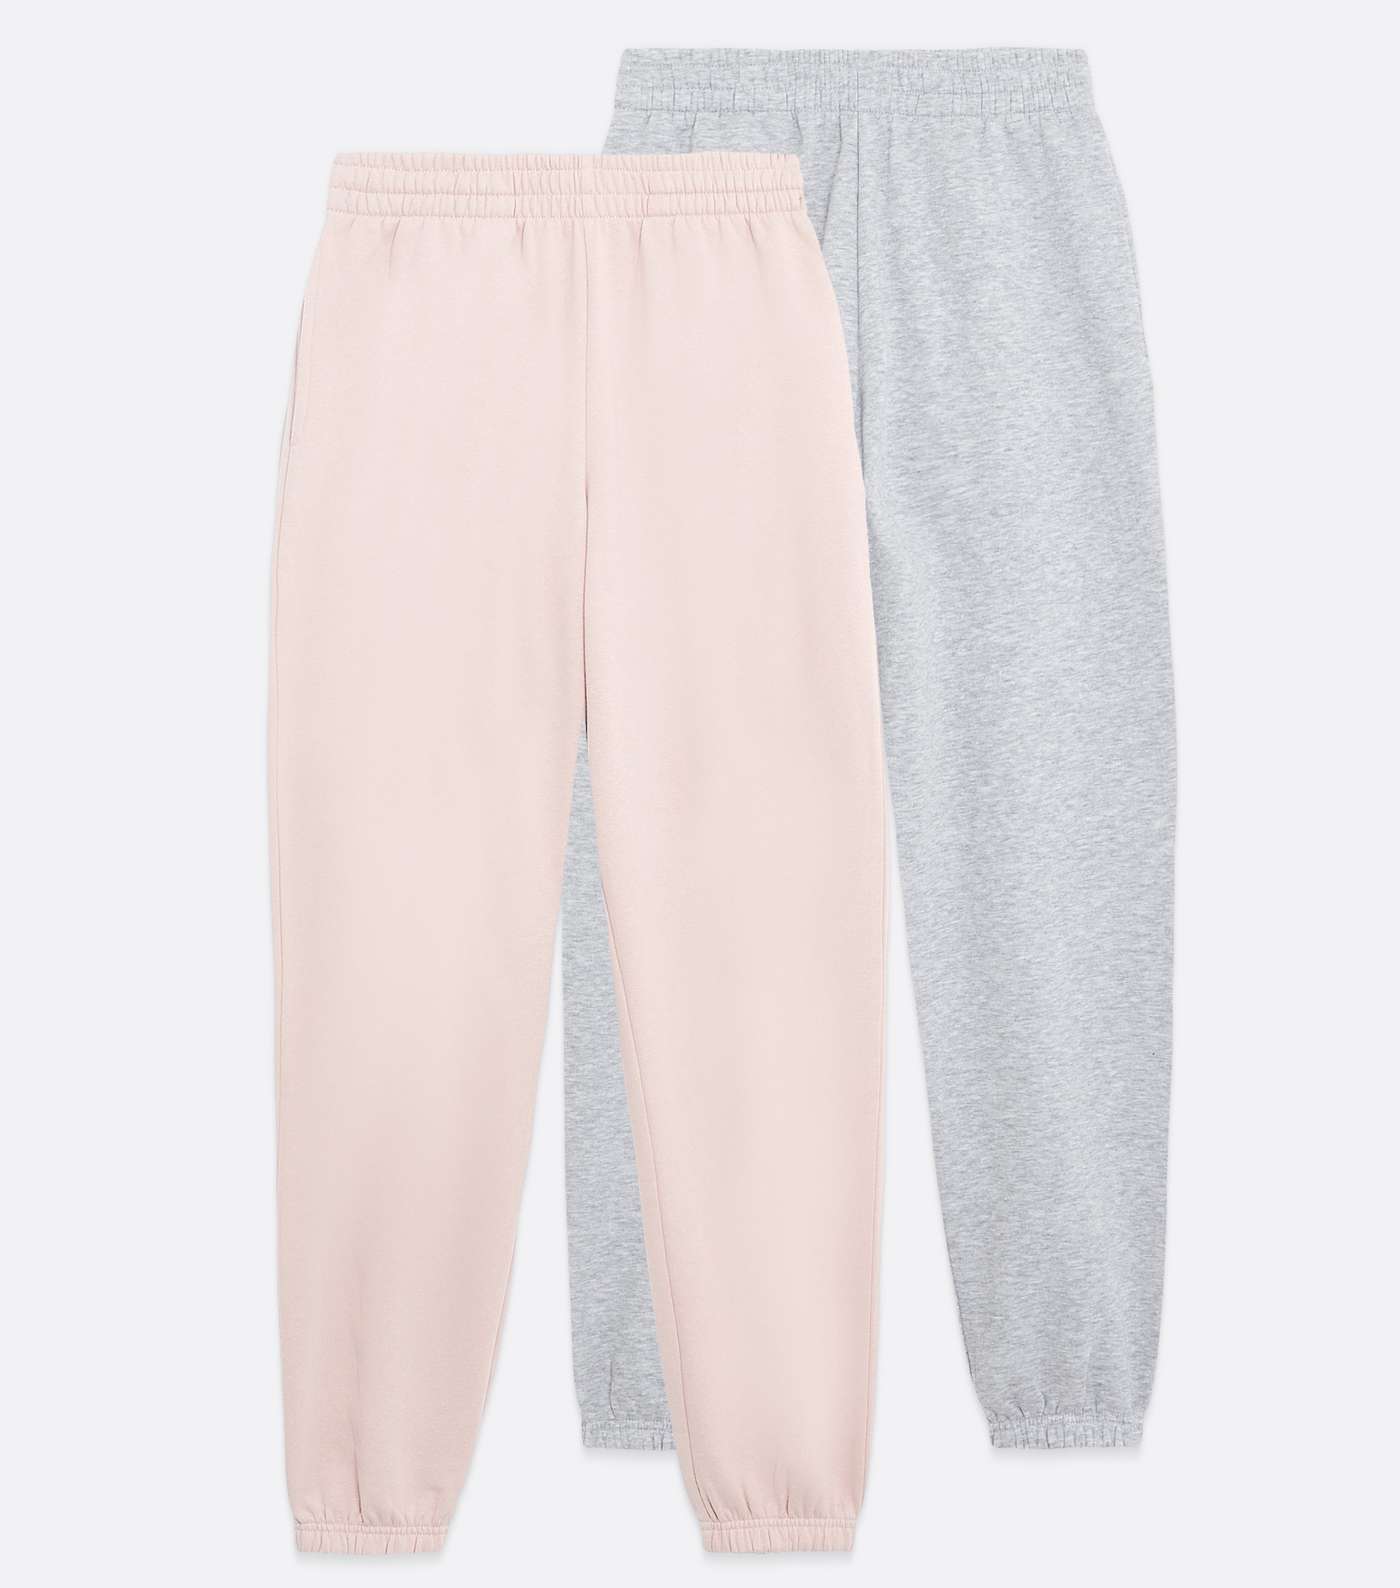 Girls 2 Pack Pale Pink and Grey Cuffed Joggers Image 5